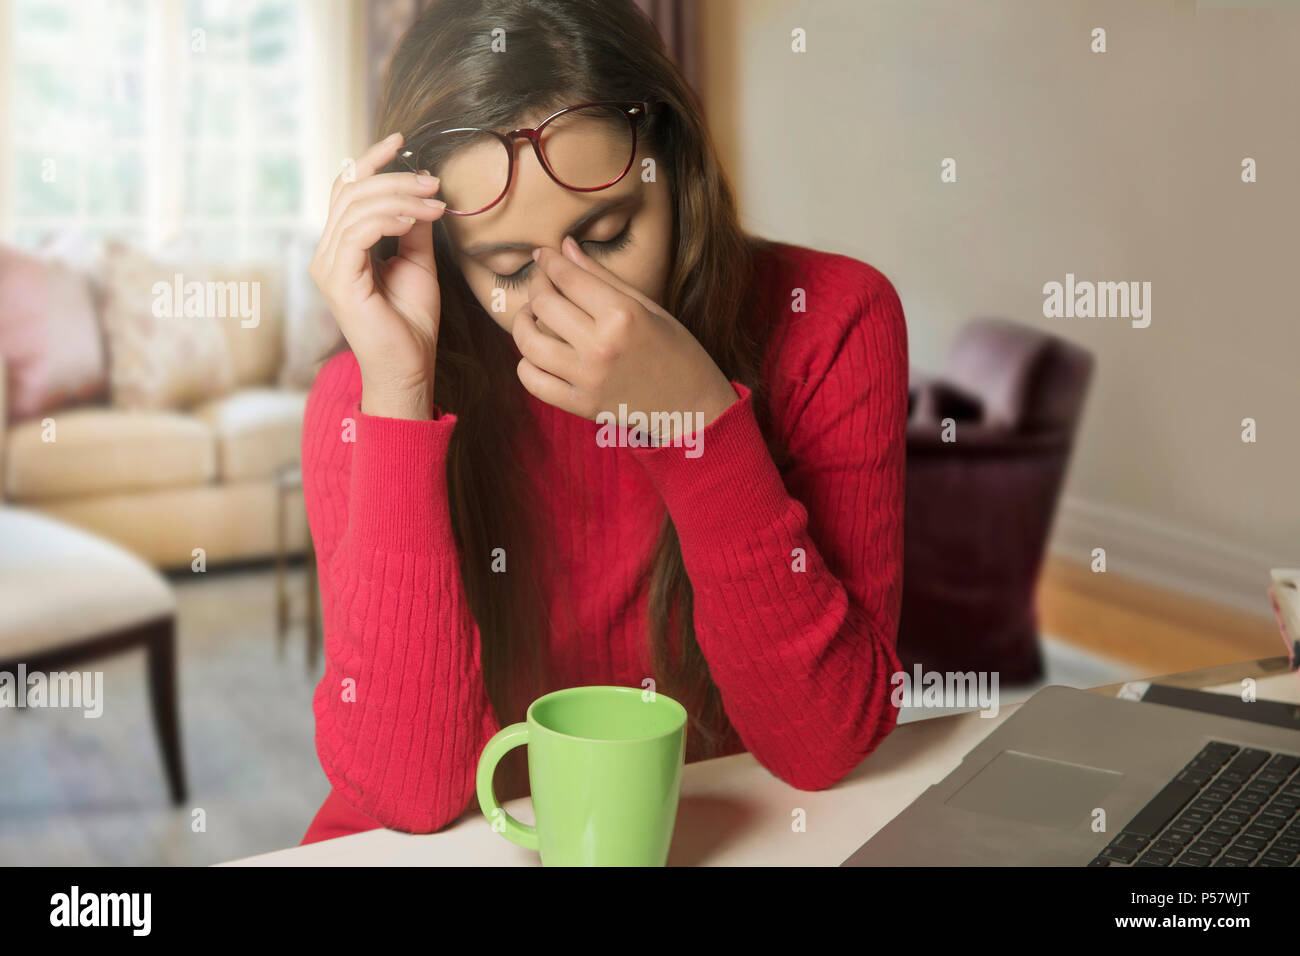 Stressed businesswoman at laptop with head in hands Stock Photo